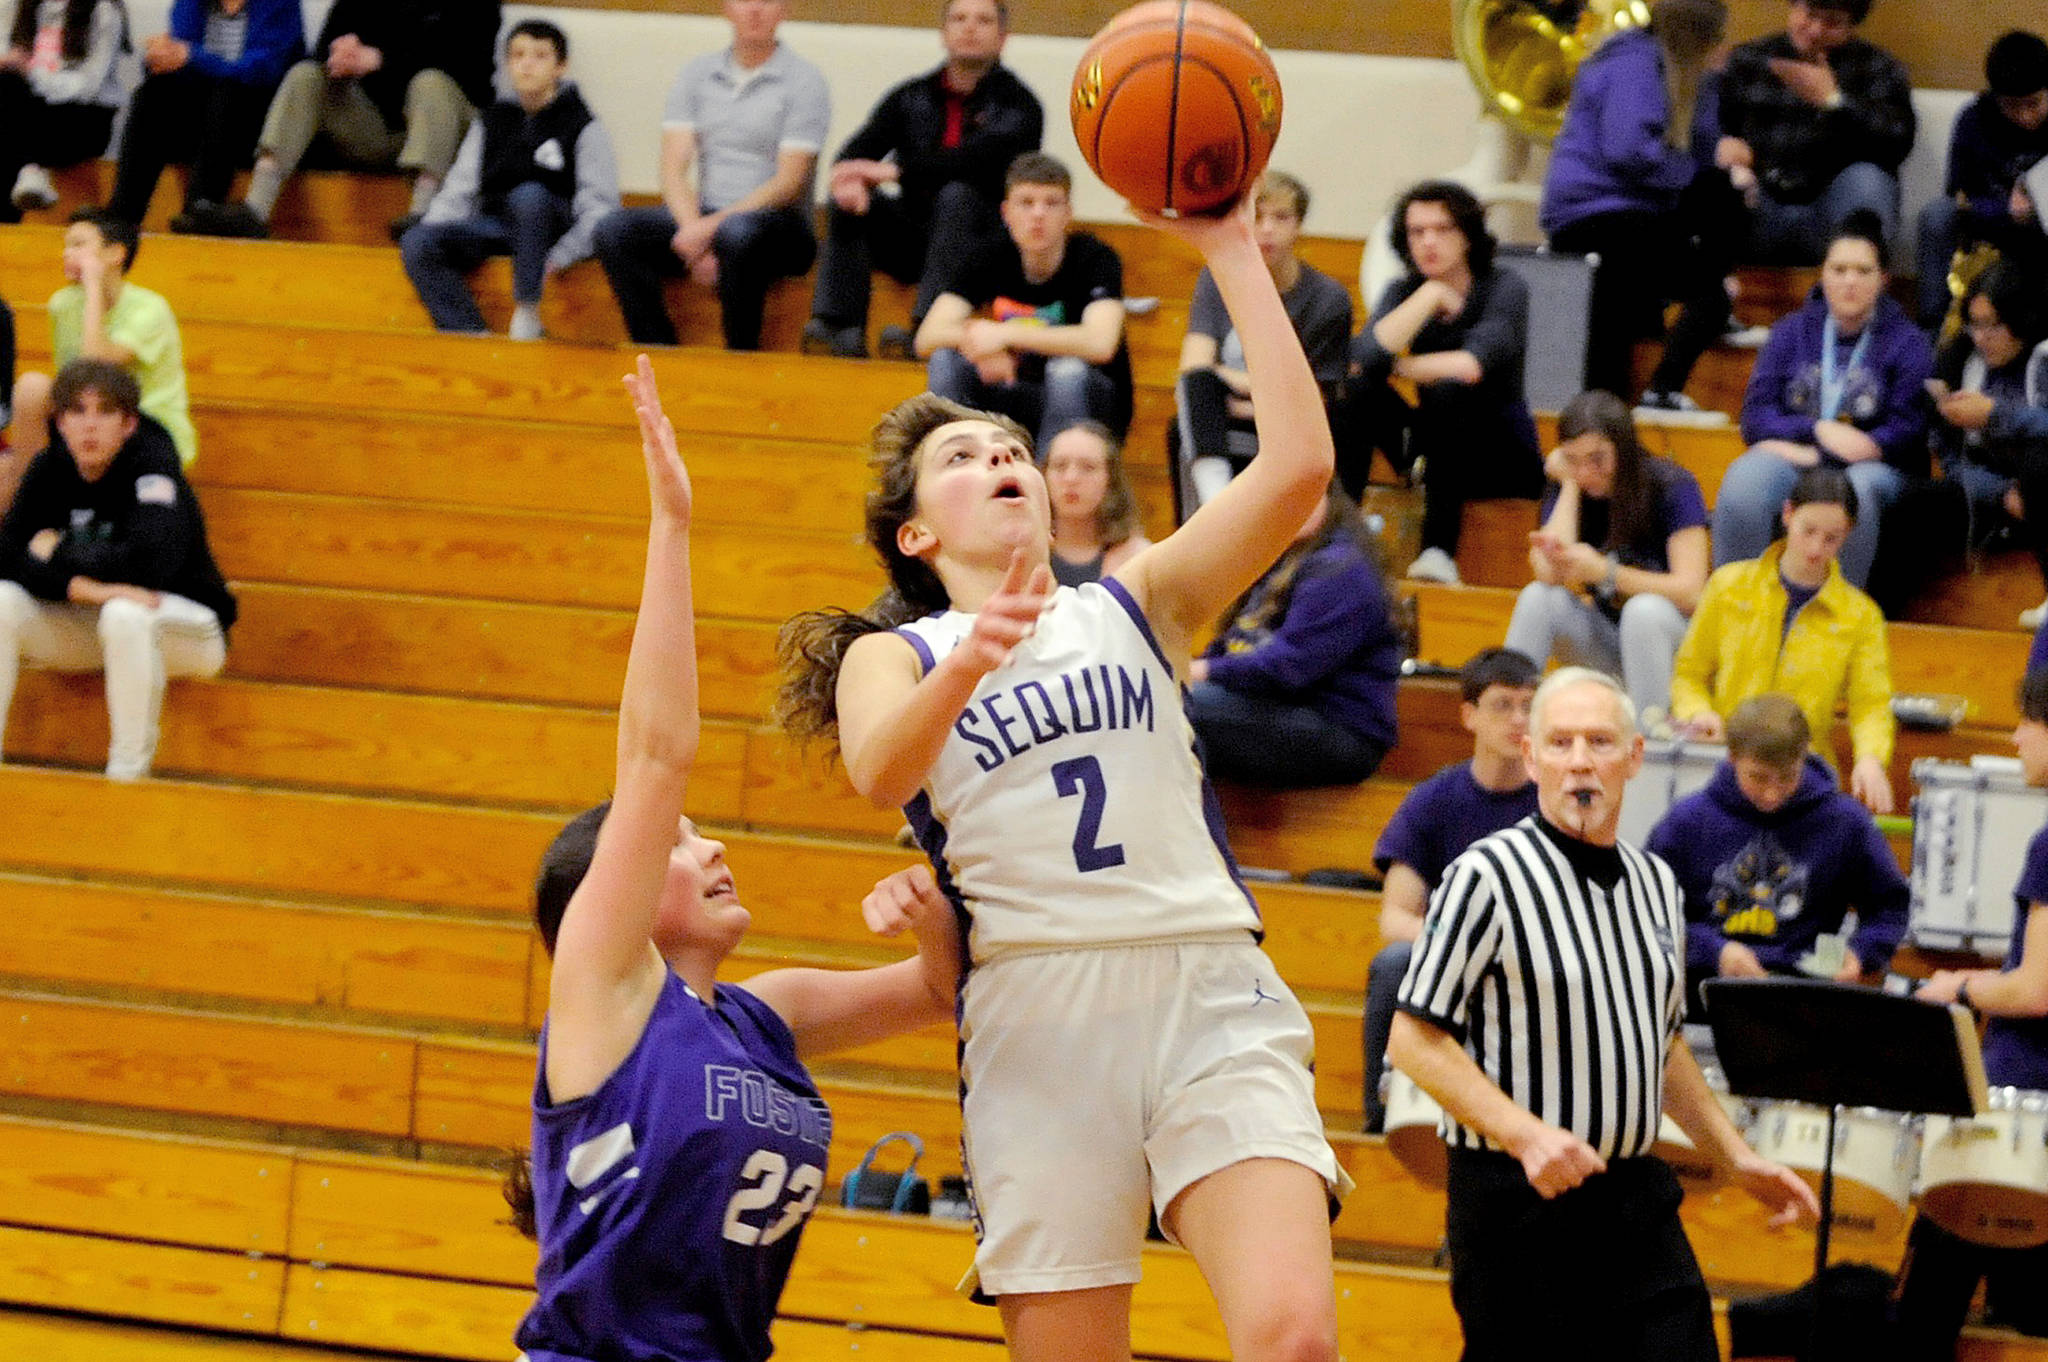 Sequim Wolves guard Jessica Dietzman goes up for a first-quarter layup while being defended by Foster Bulldogs guard Kelcie Newnom during the Wolves’ 92-22 district playoffs win over the Bulldogs on Feb. 12. Dietzman scored 18 points with five steals and four assists, and her defense helped spark numerous fast breaks throughout the game. Sequim Gazette photo by Conor Dowley